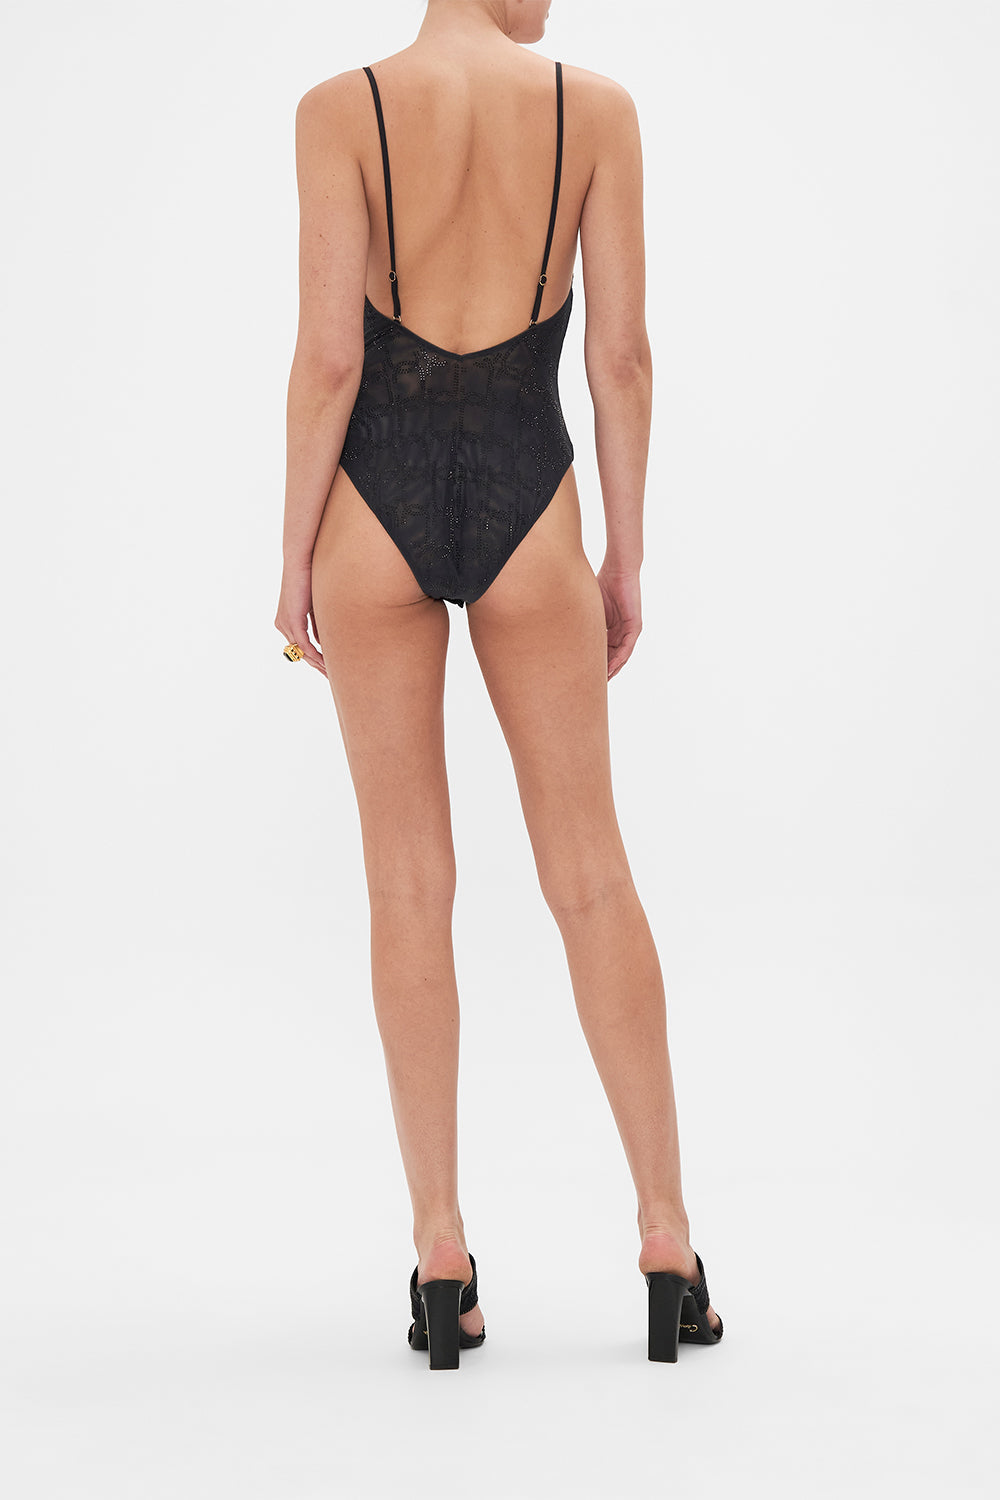 Recycled Mesh High Leg Leopard Bodysuit - WE ARE WE WEAR